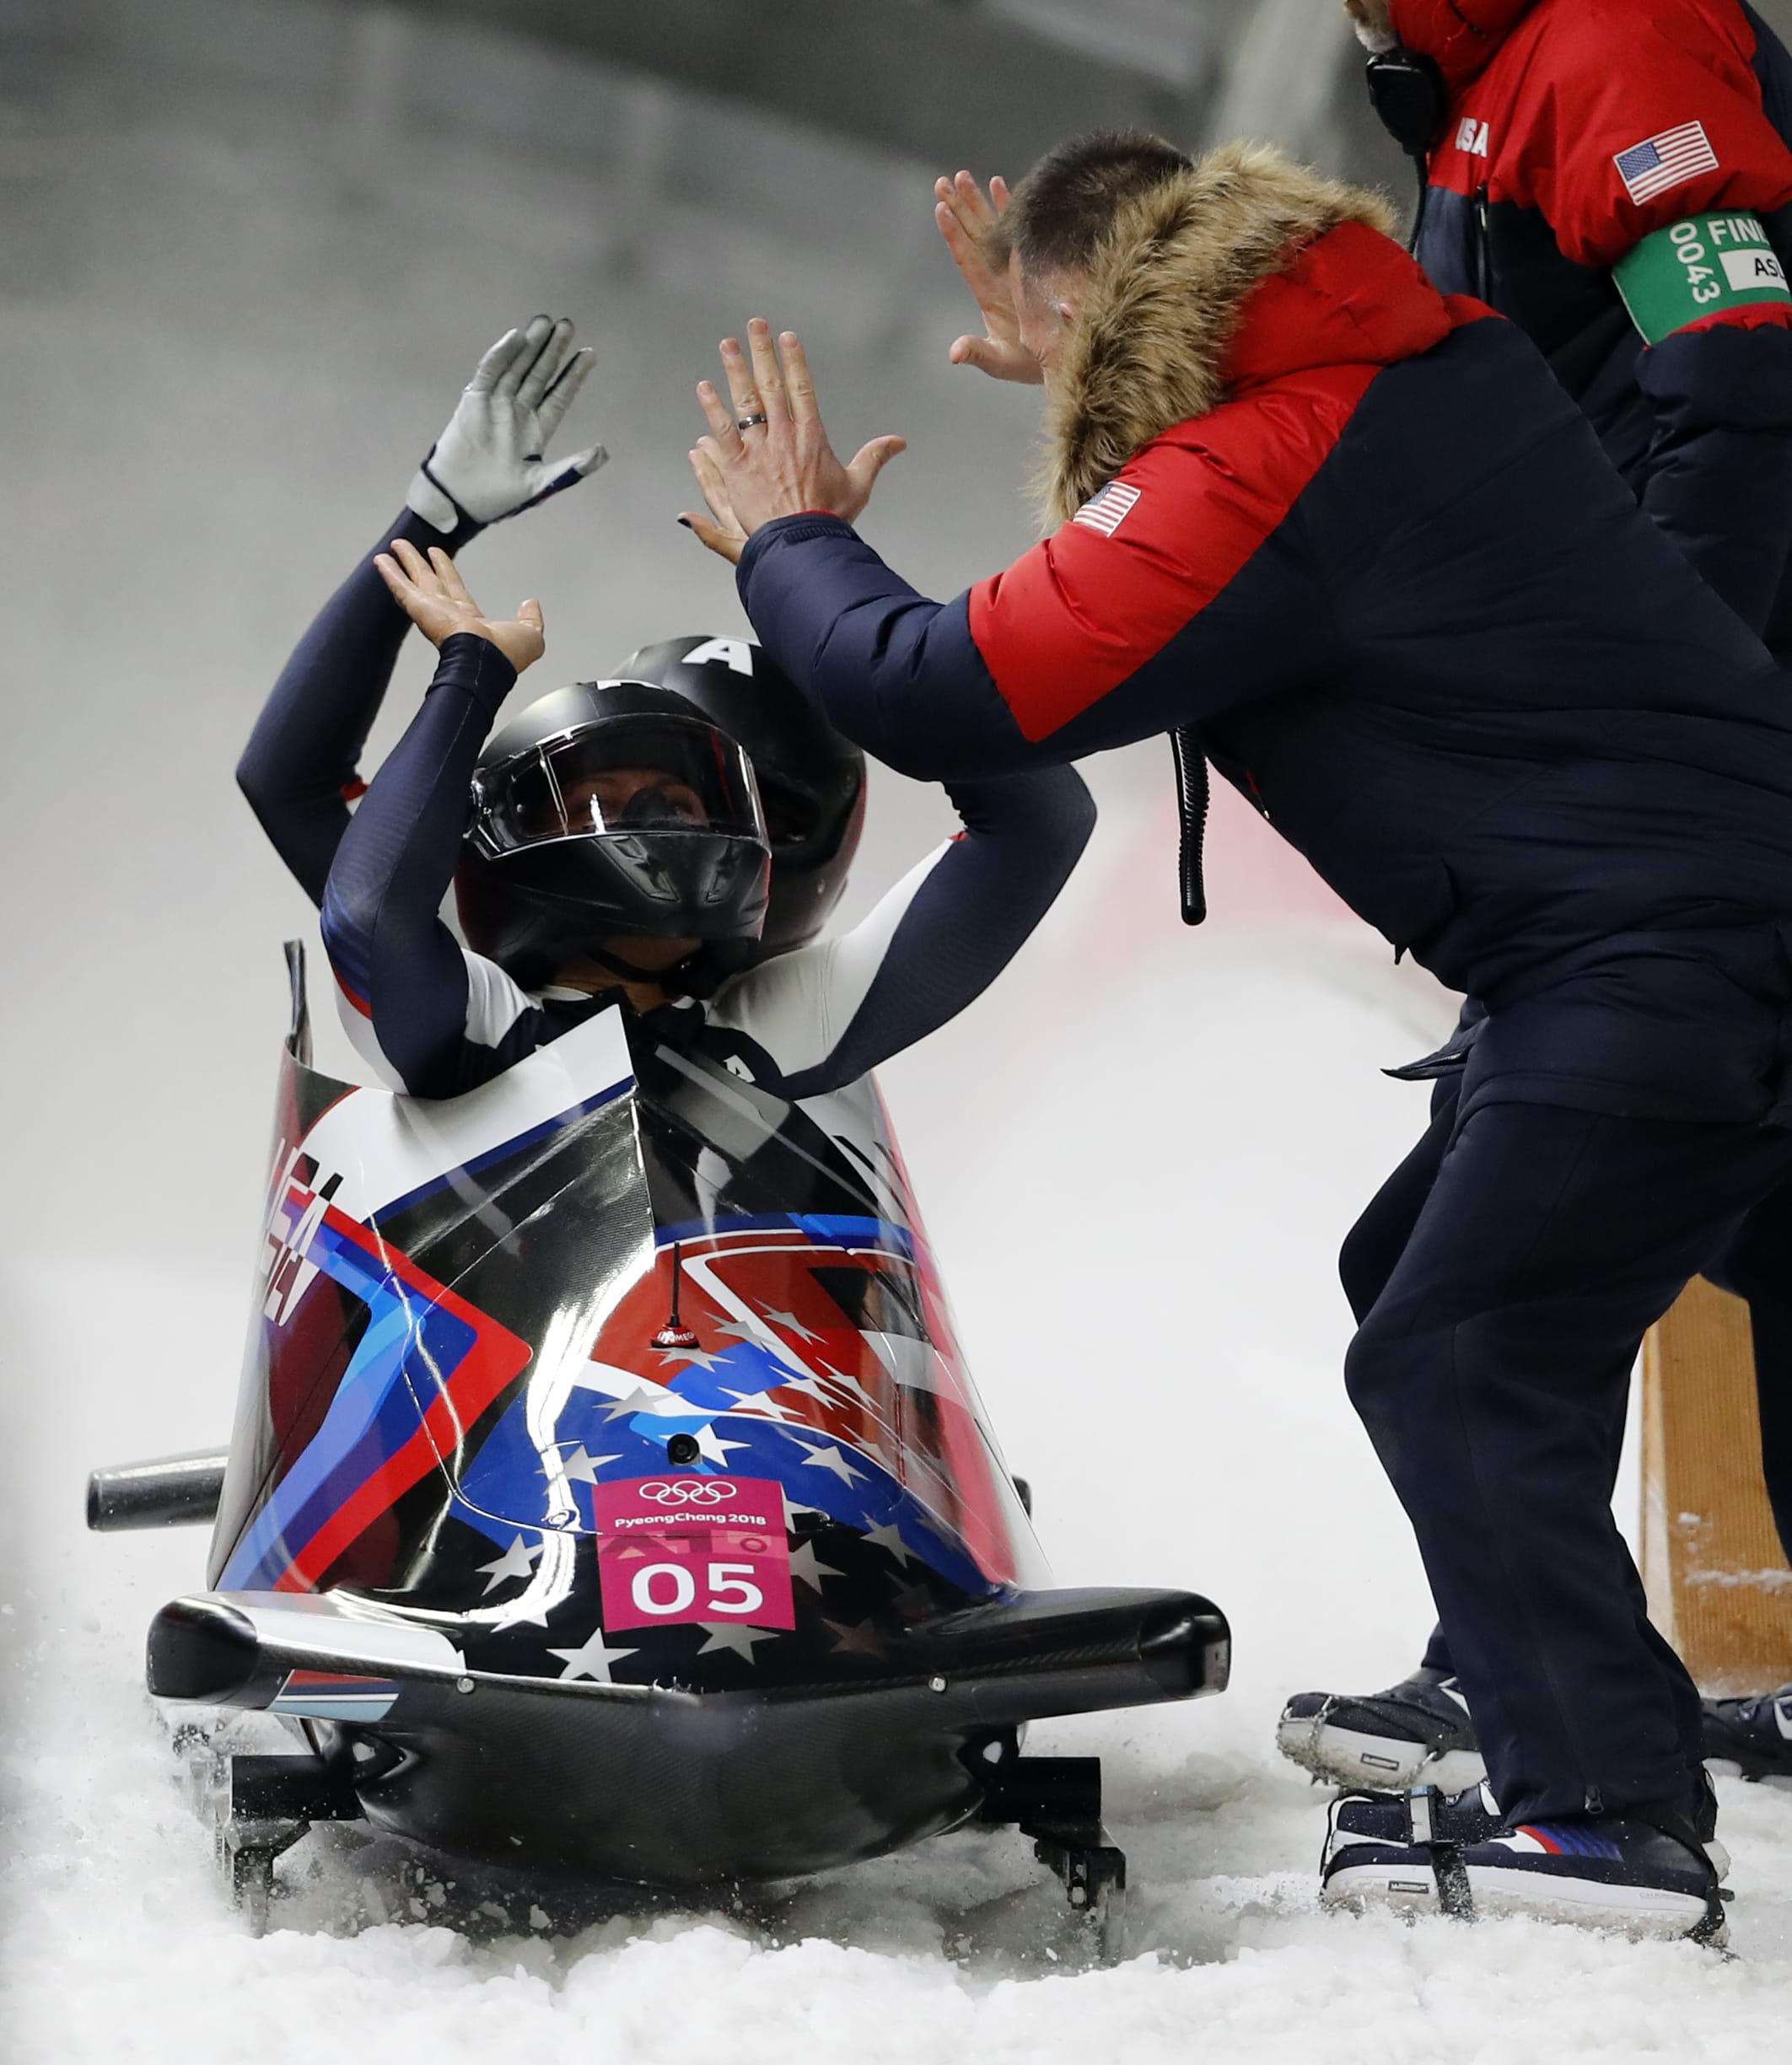 Driver Elana Meyers Taylor and Lauren Gibbs of the United States celebrate after their silver medal winning heat during the women's two-man bobsled final at the 2018 Winter Olympics in Pyeongchang, South Korea, Wednesday, Feb. 21, 2018.